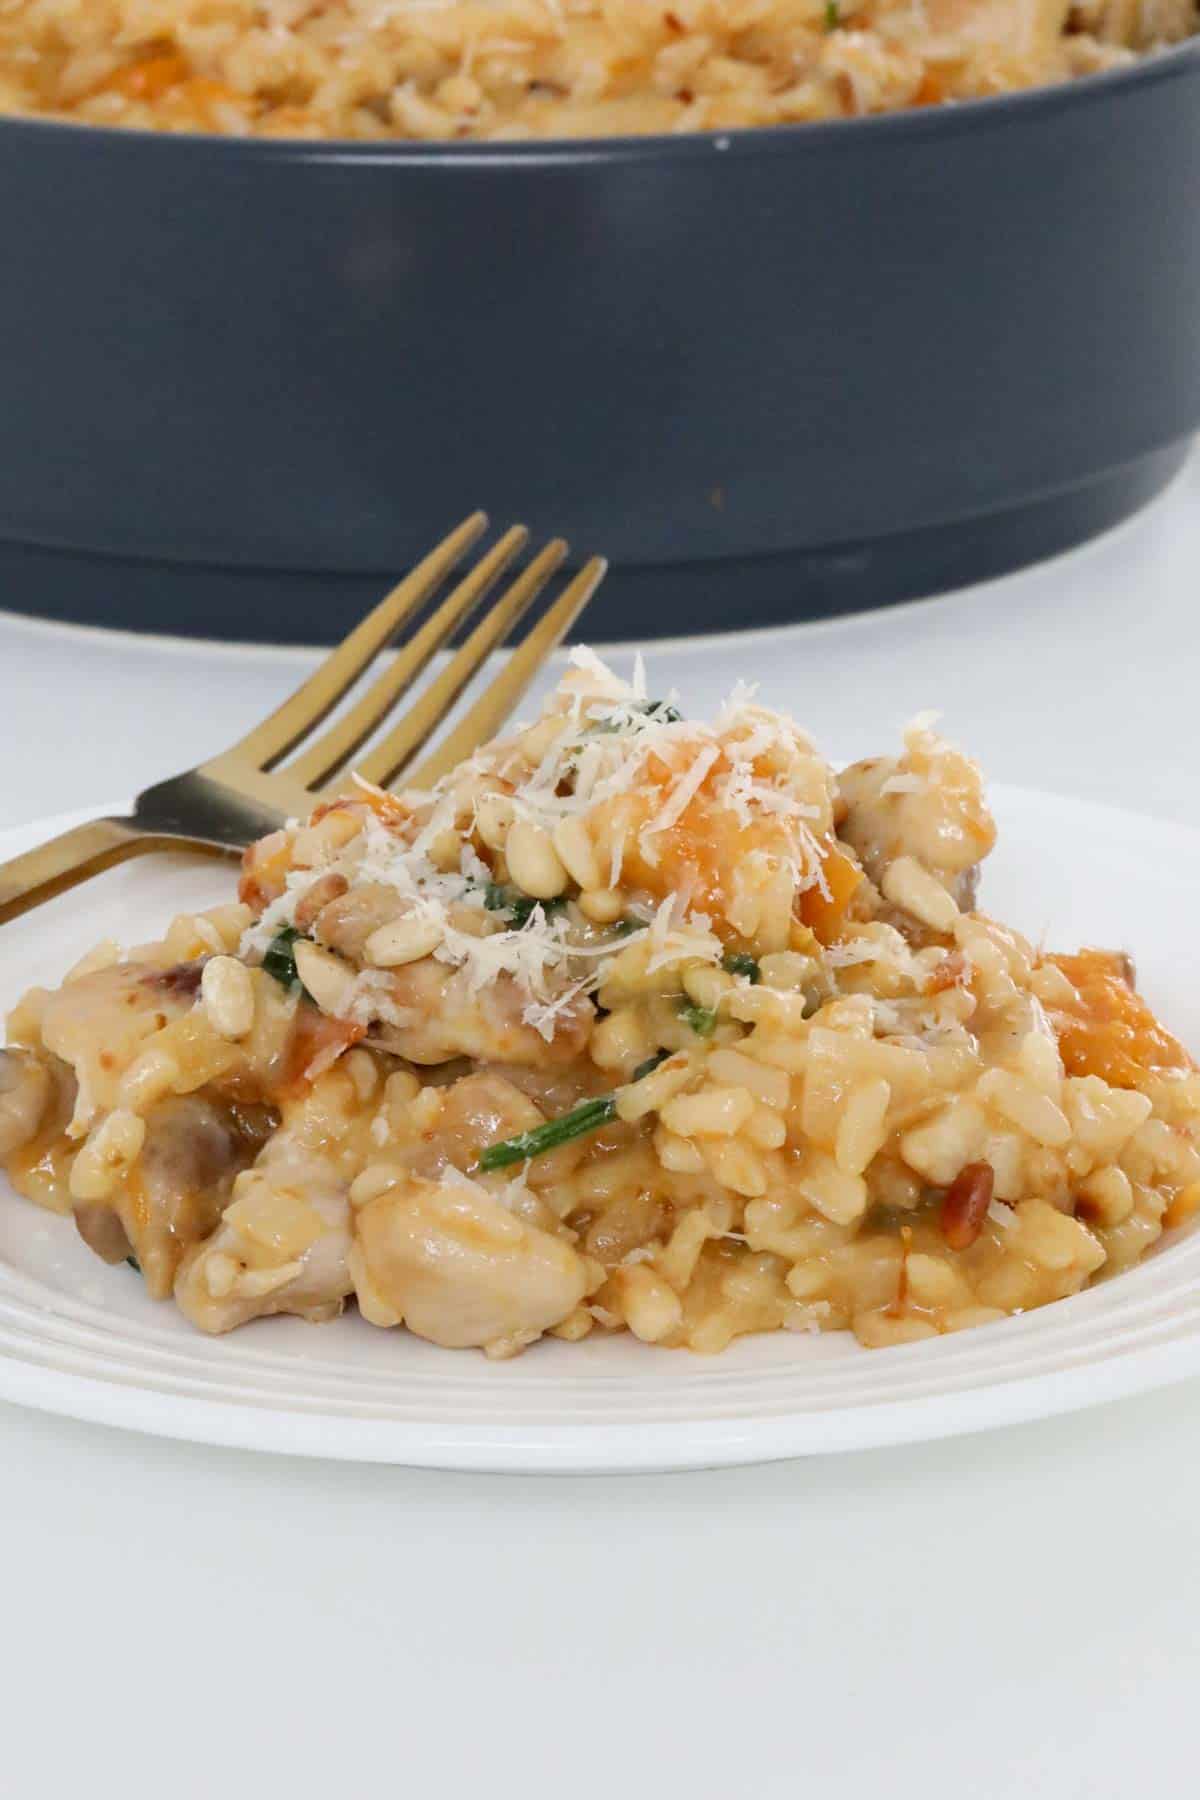 A plate of risotto with a fork, the serving dish of risotto just visible behind.